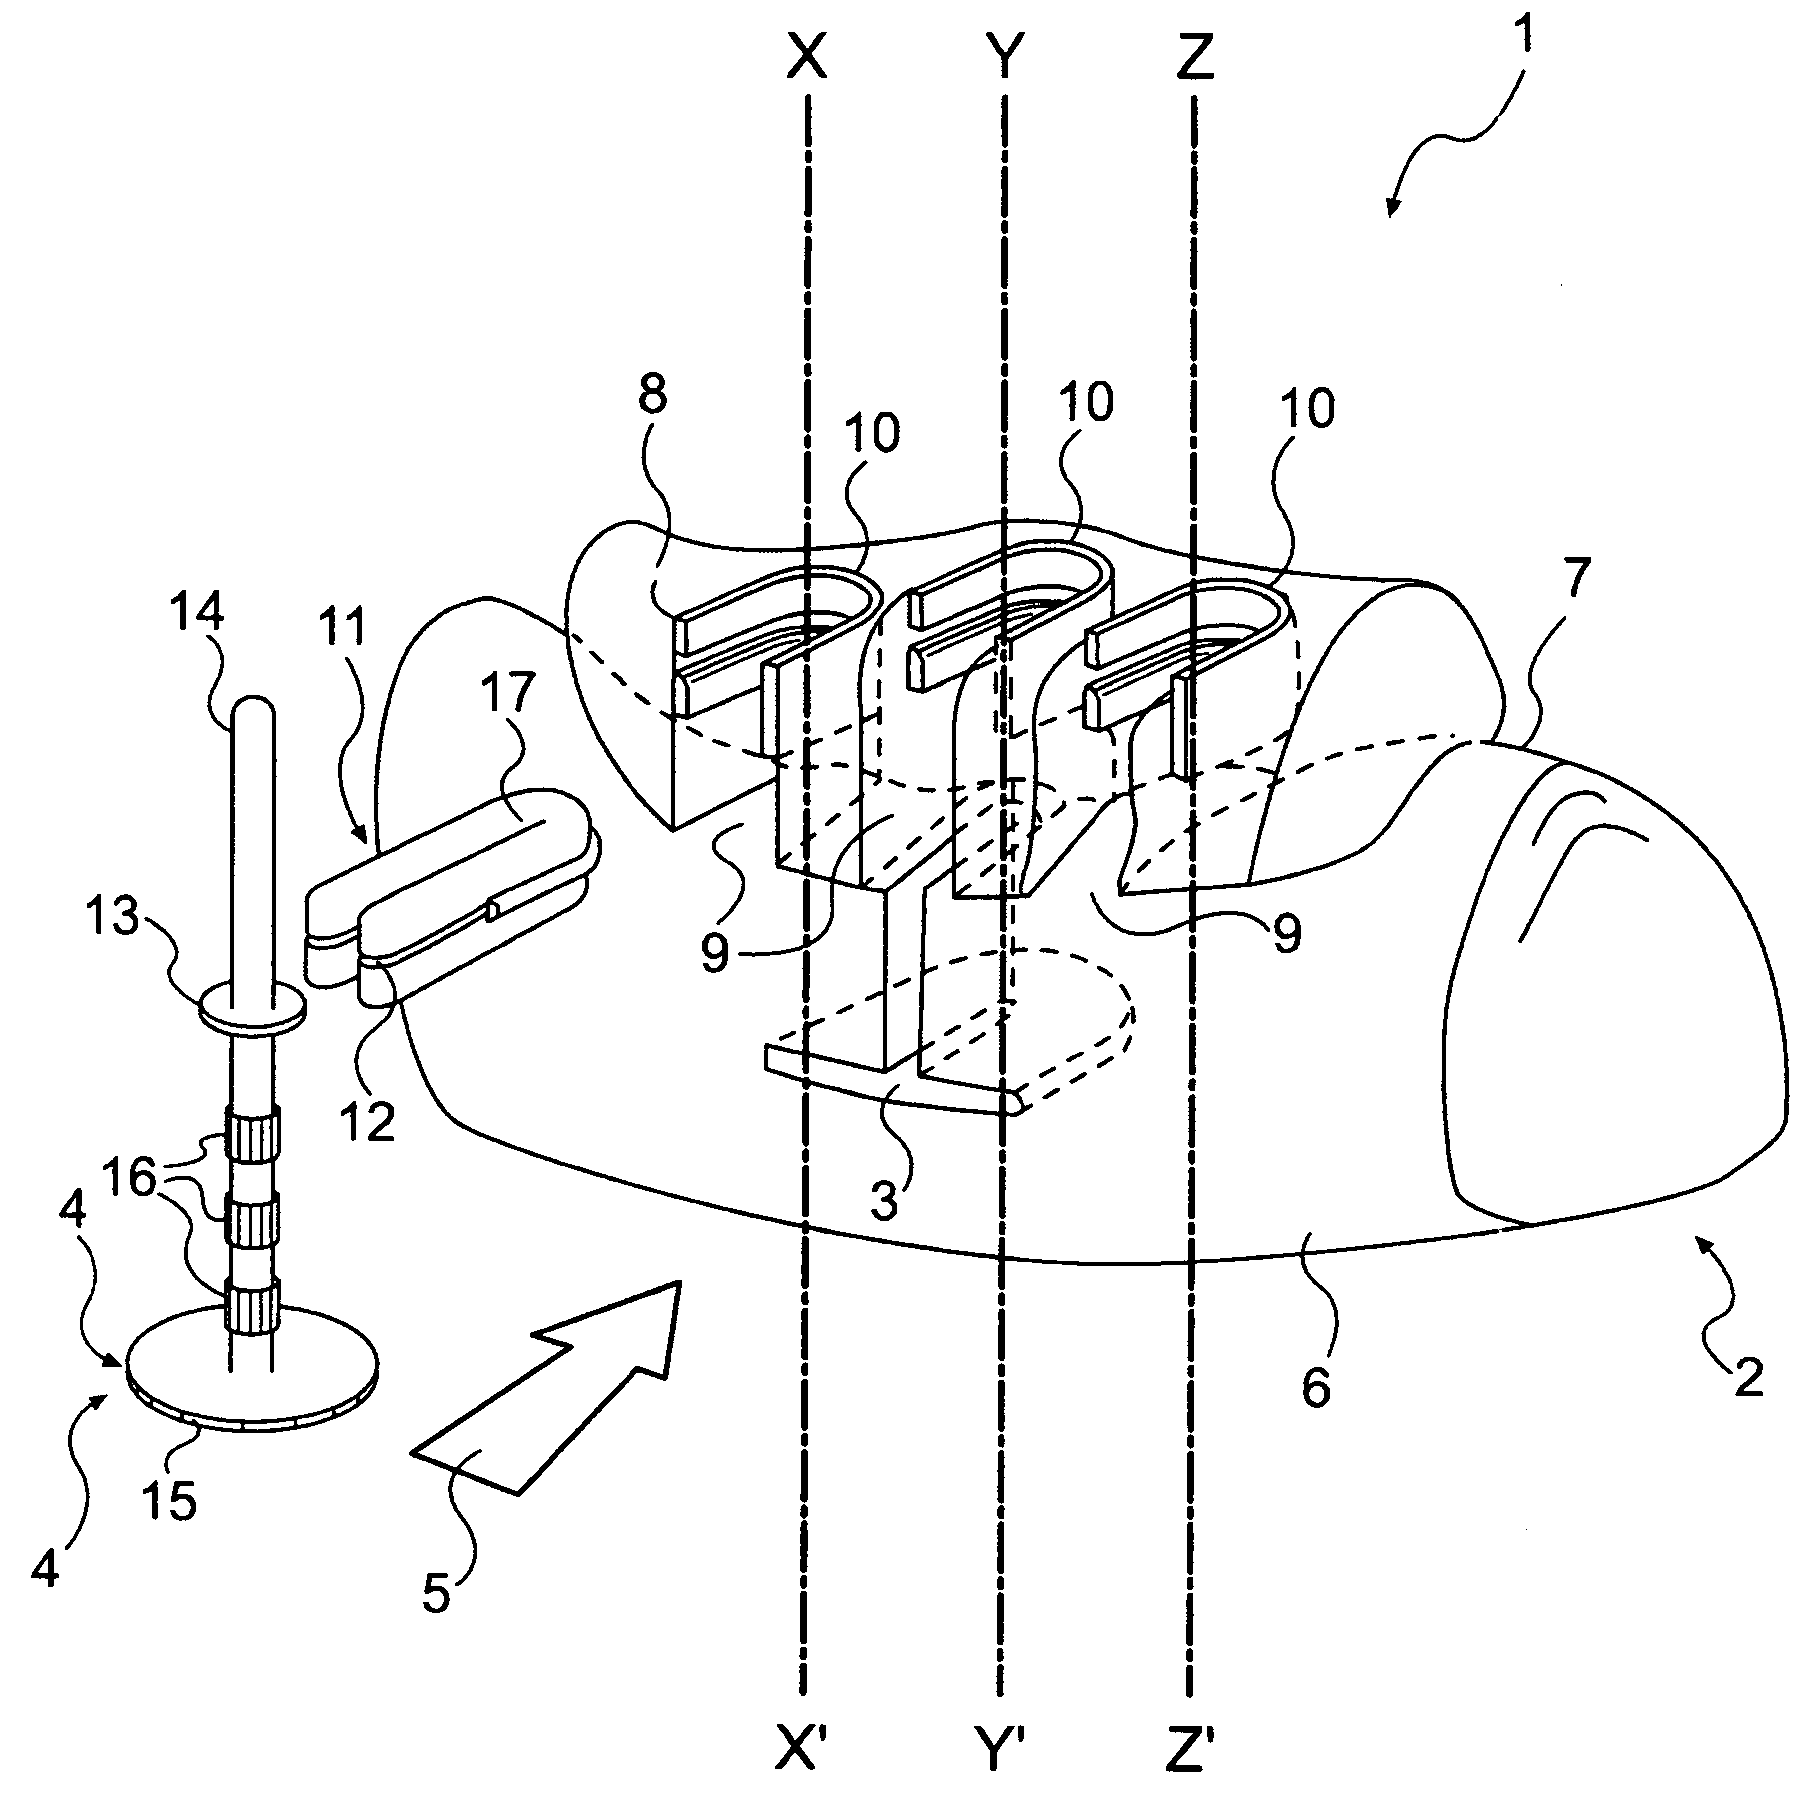 Custom-fit implant surgery guide and associated milling cutter, method for their production, and their use